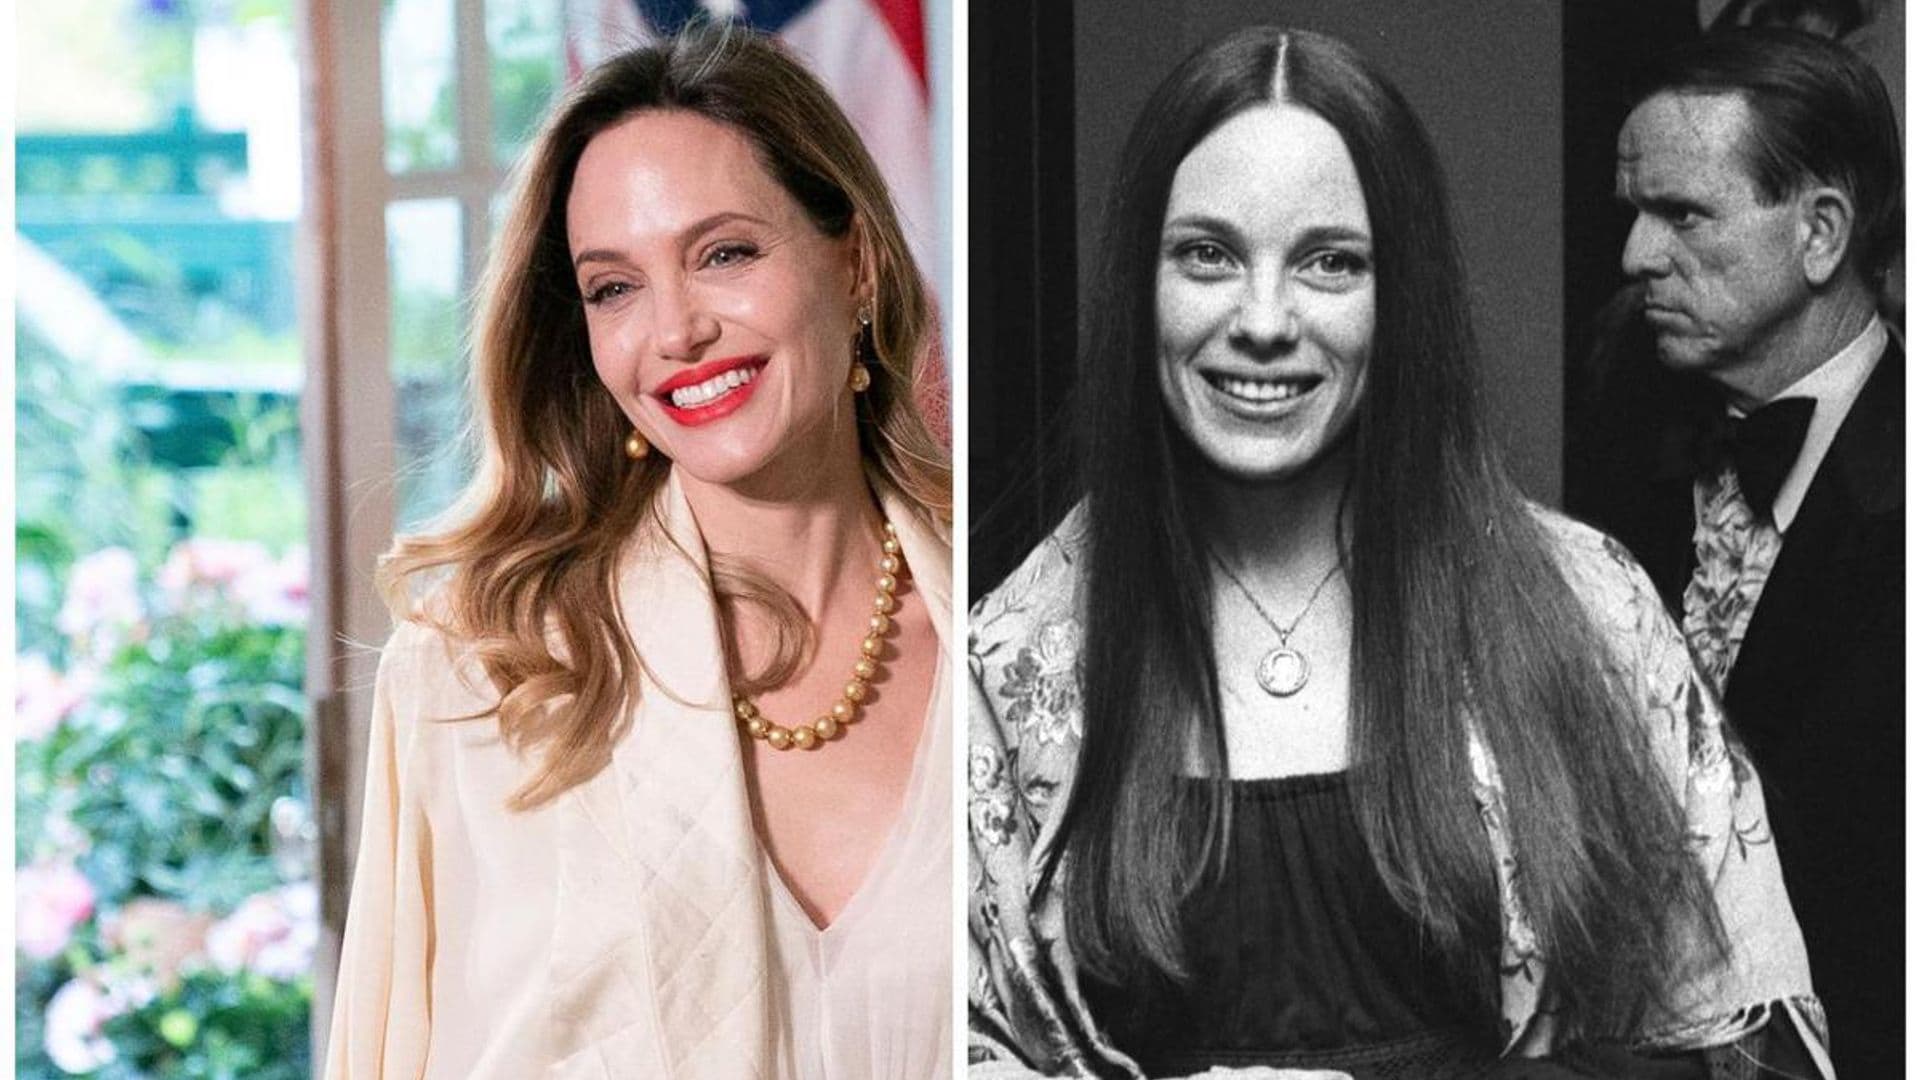 5 Photos that prove Angelina Jolie looks just like her mom